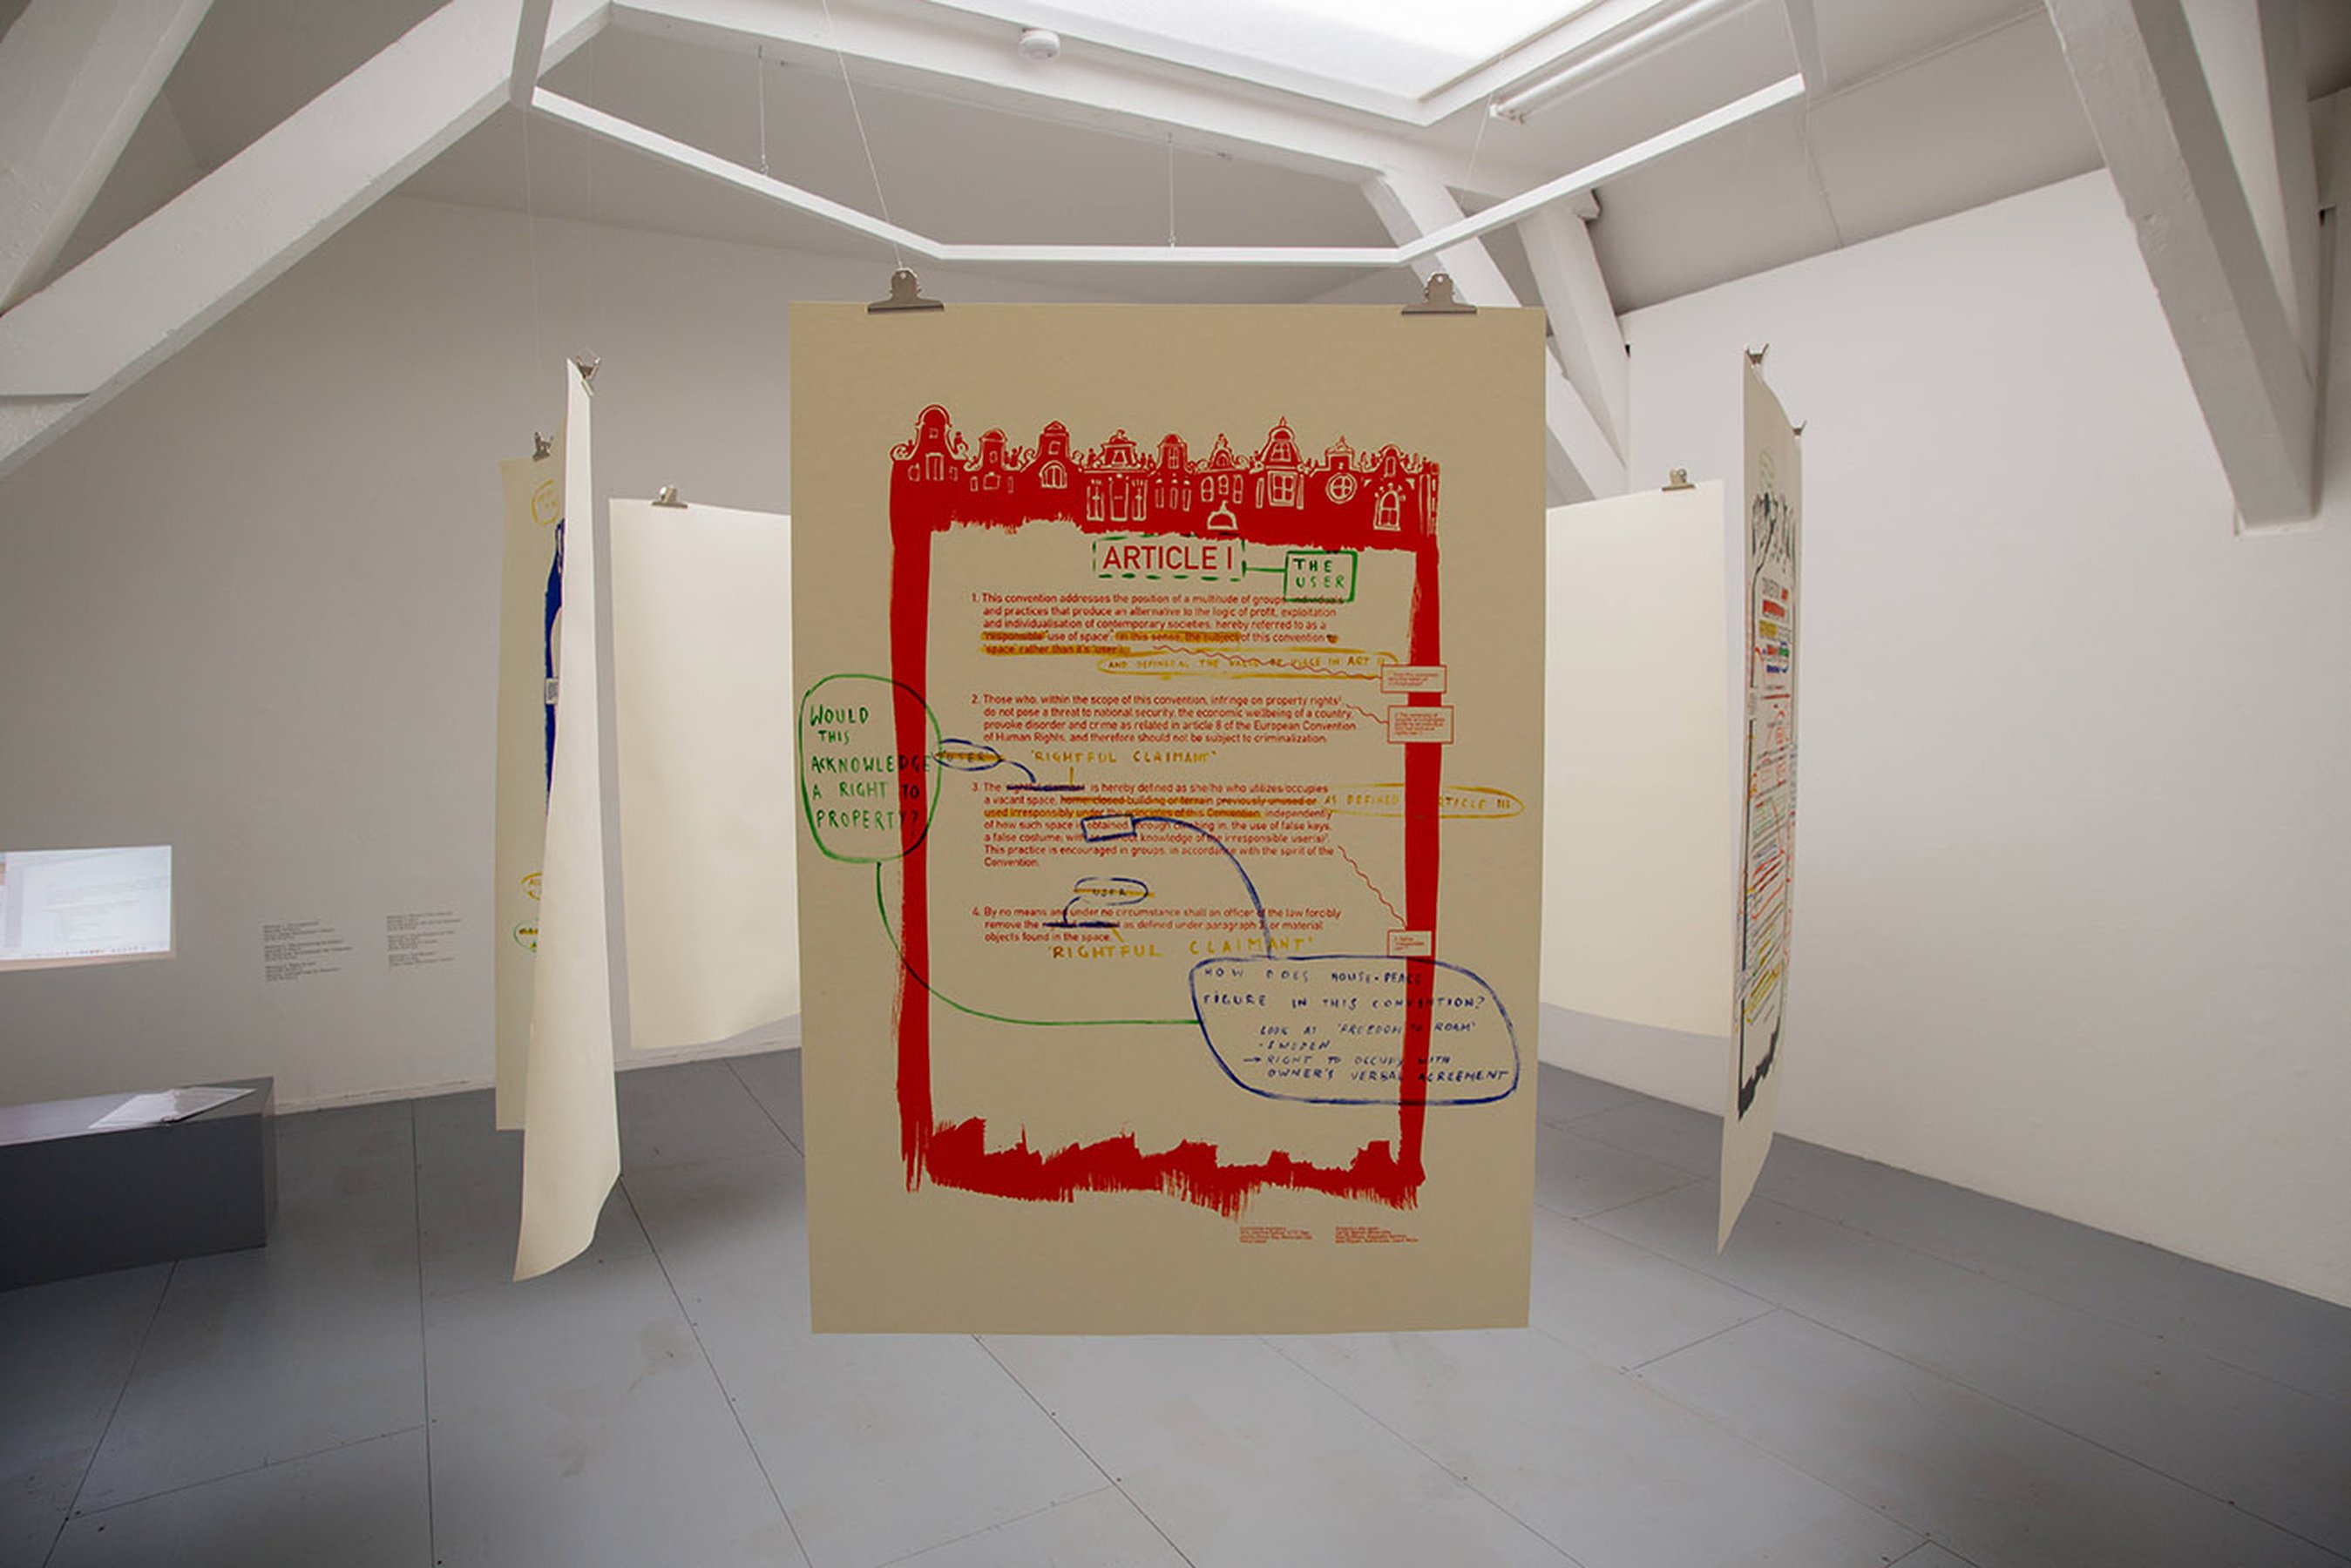 White paper: The Law, 2015 6 screen-printed posters with hand-written notes and corrections 100 × 140 cm; each ; installation view at Casco 2015